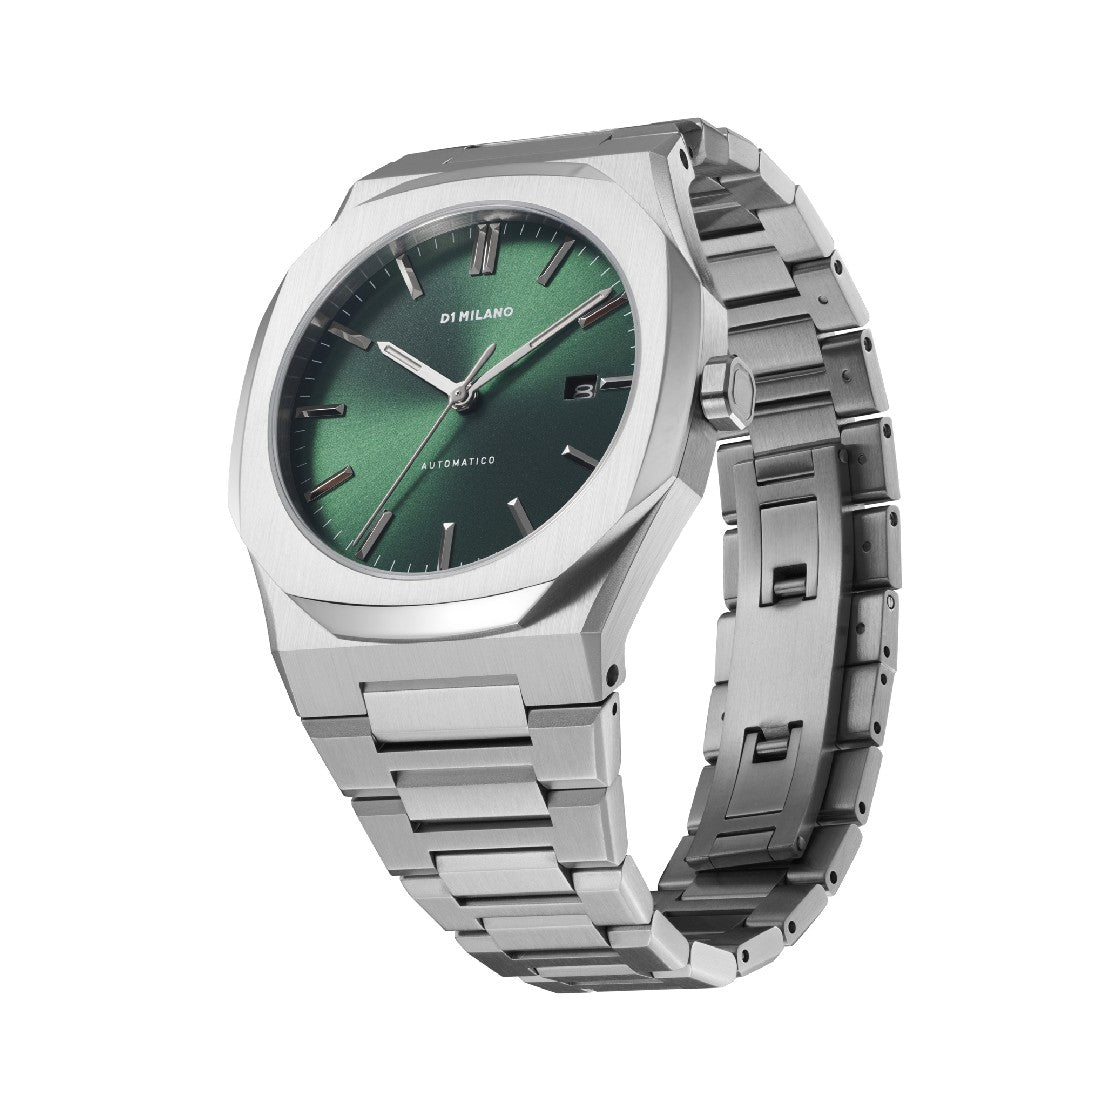 D1 Milano Men's Automatic Movement Green Dial Watch - ML-0222